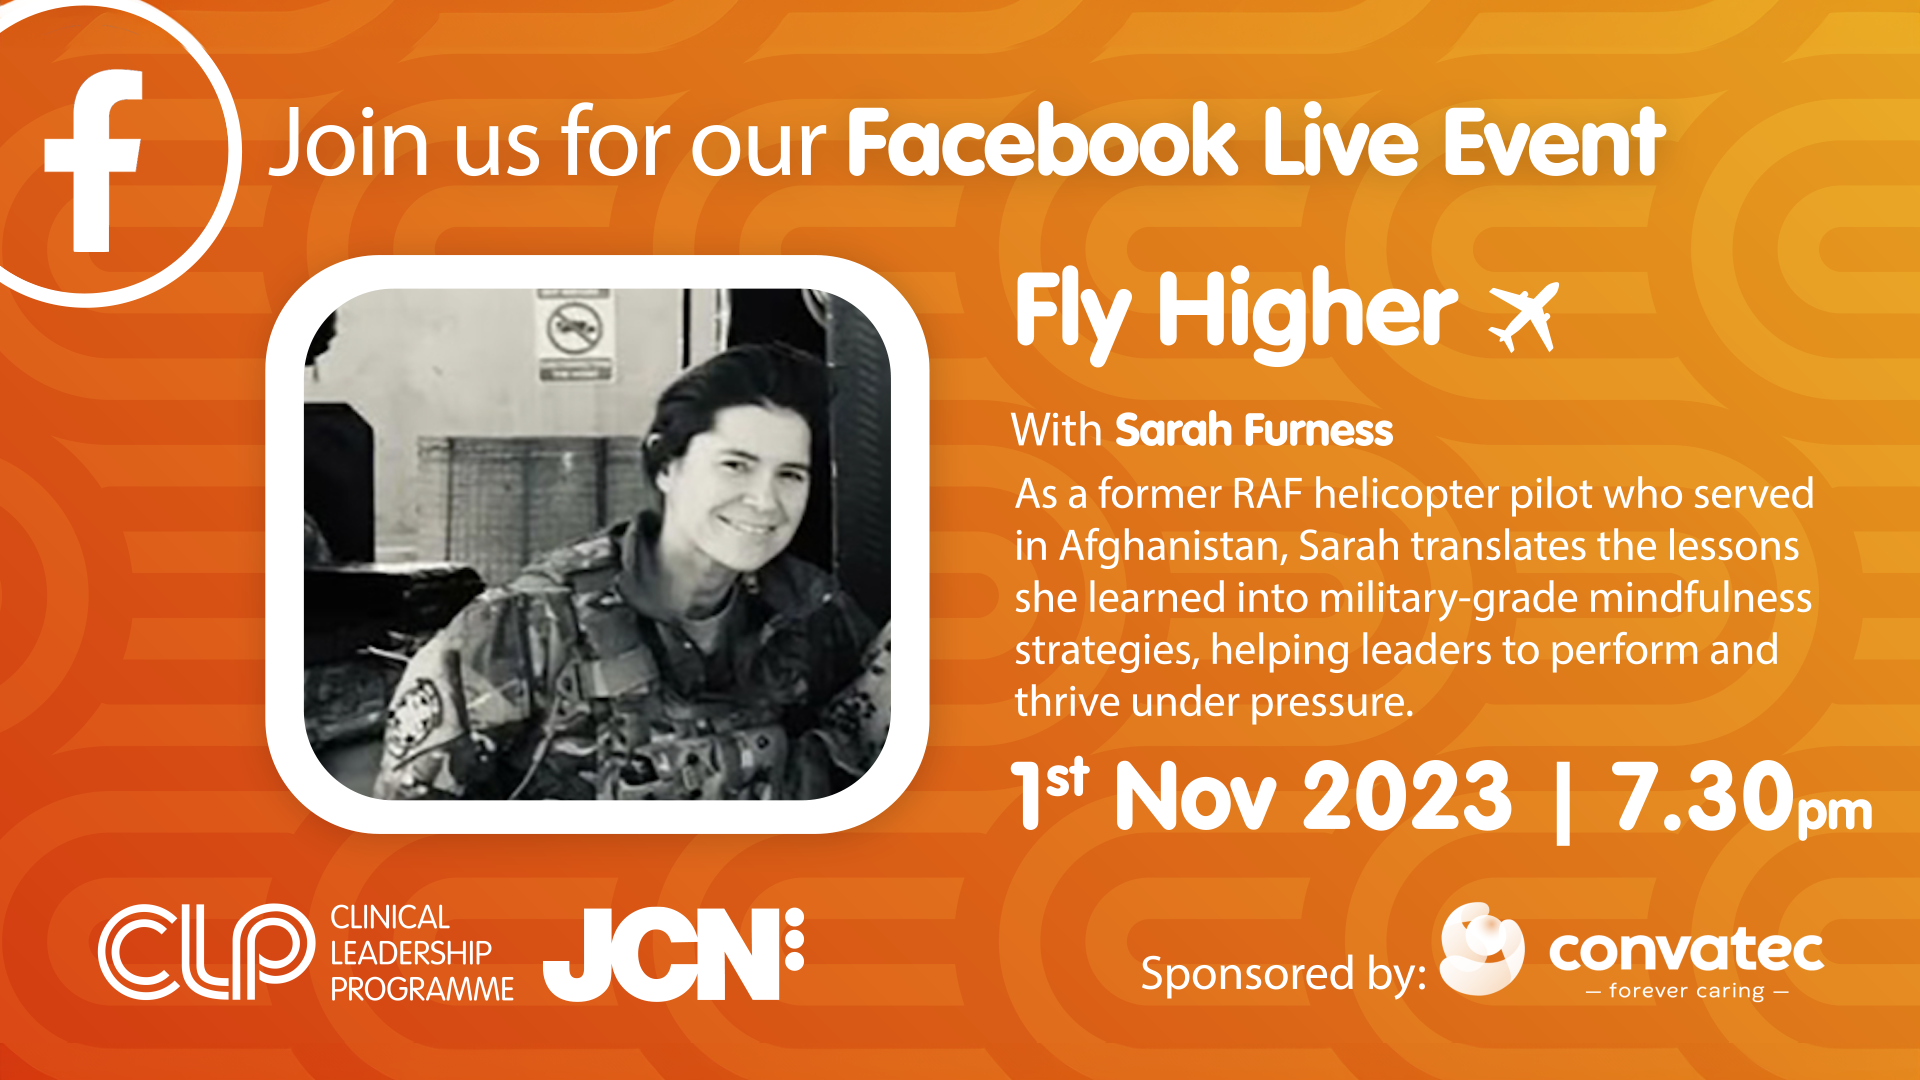 Watch the FB Live event - Fly Higher on jcn.co.uk